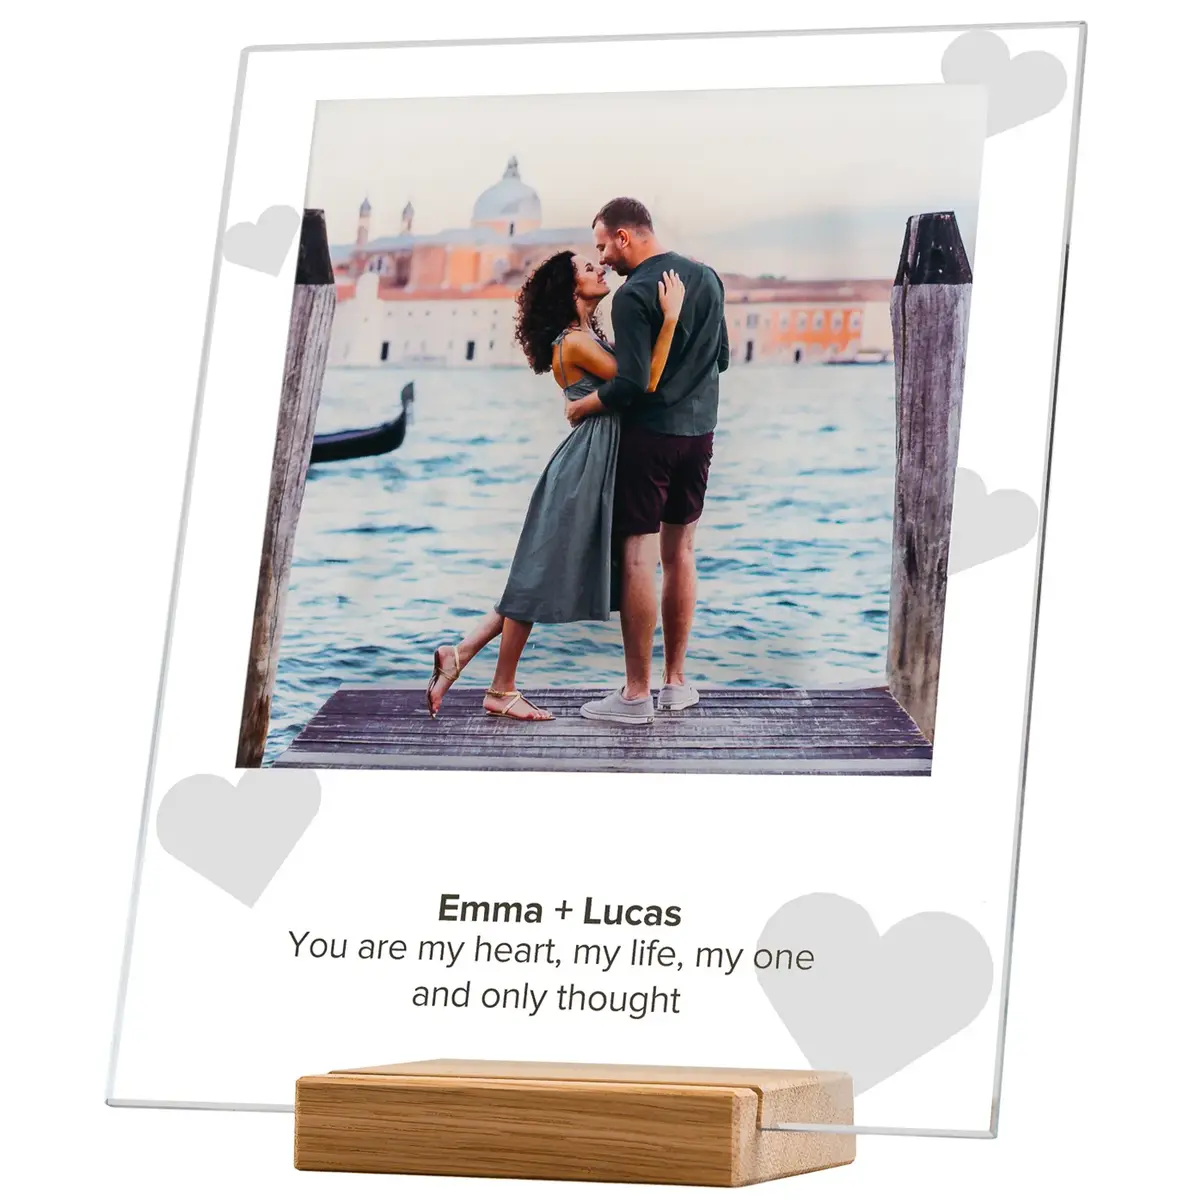 Glass plate template - For Couples editor